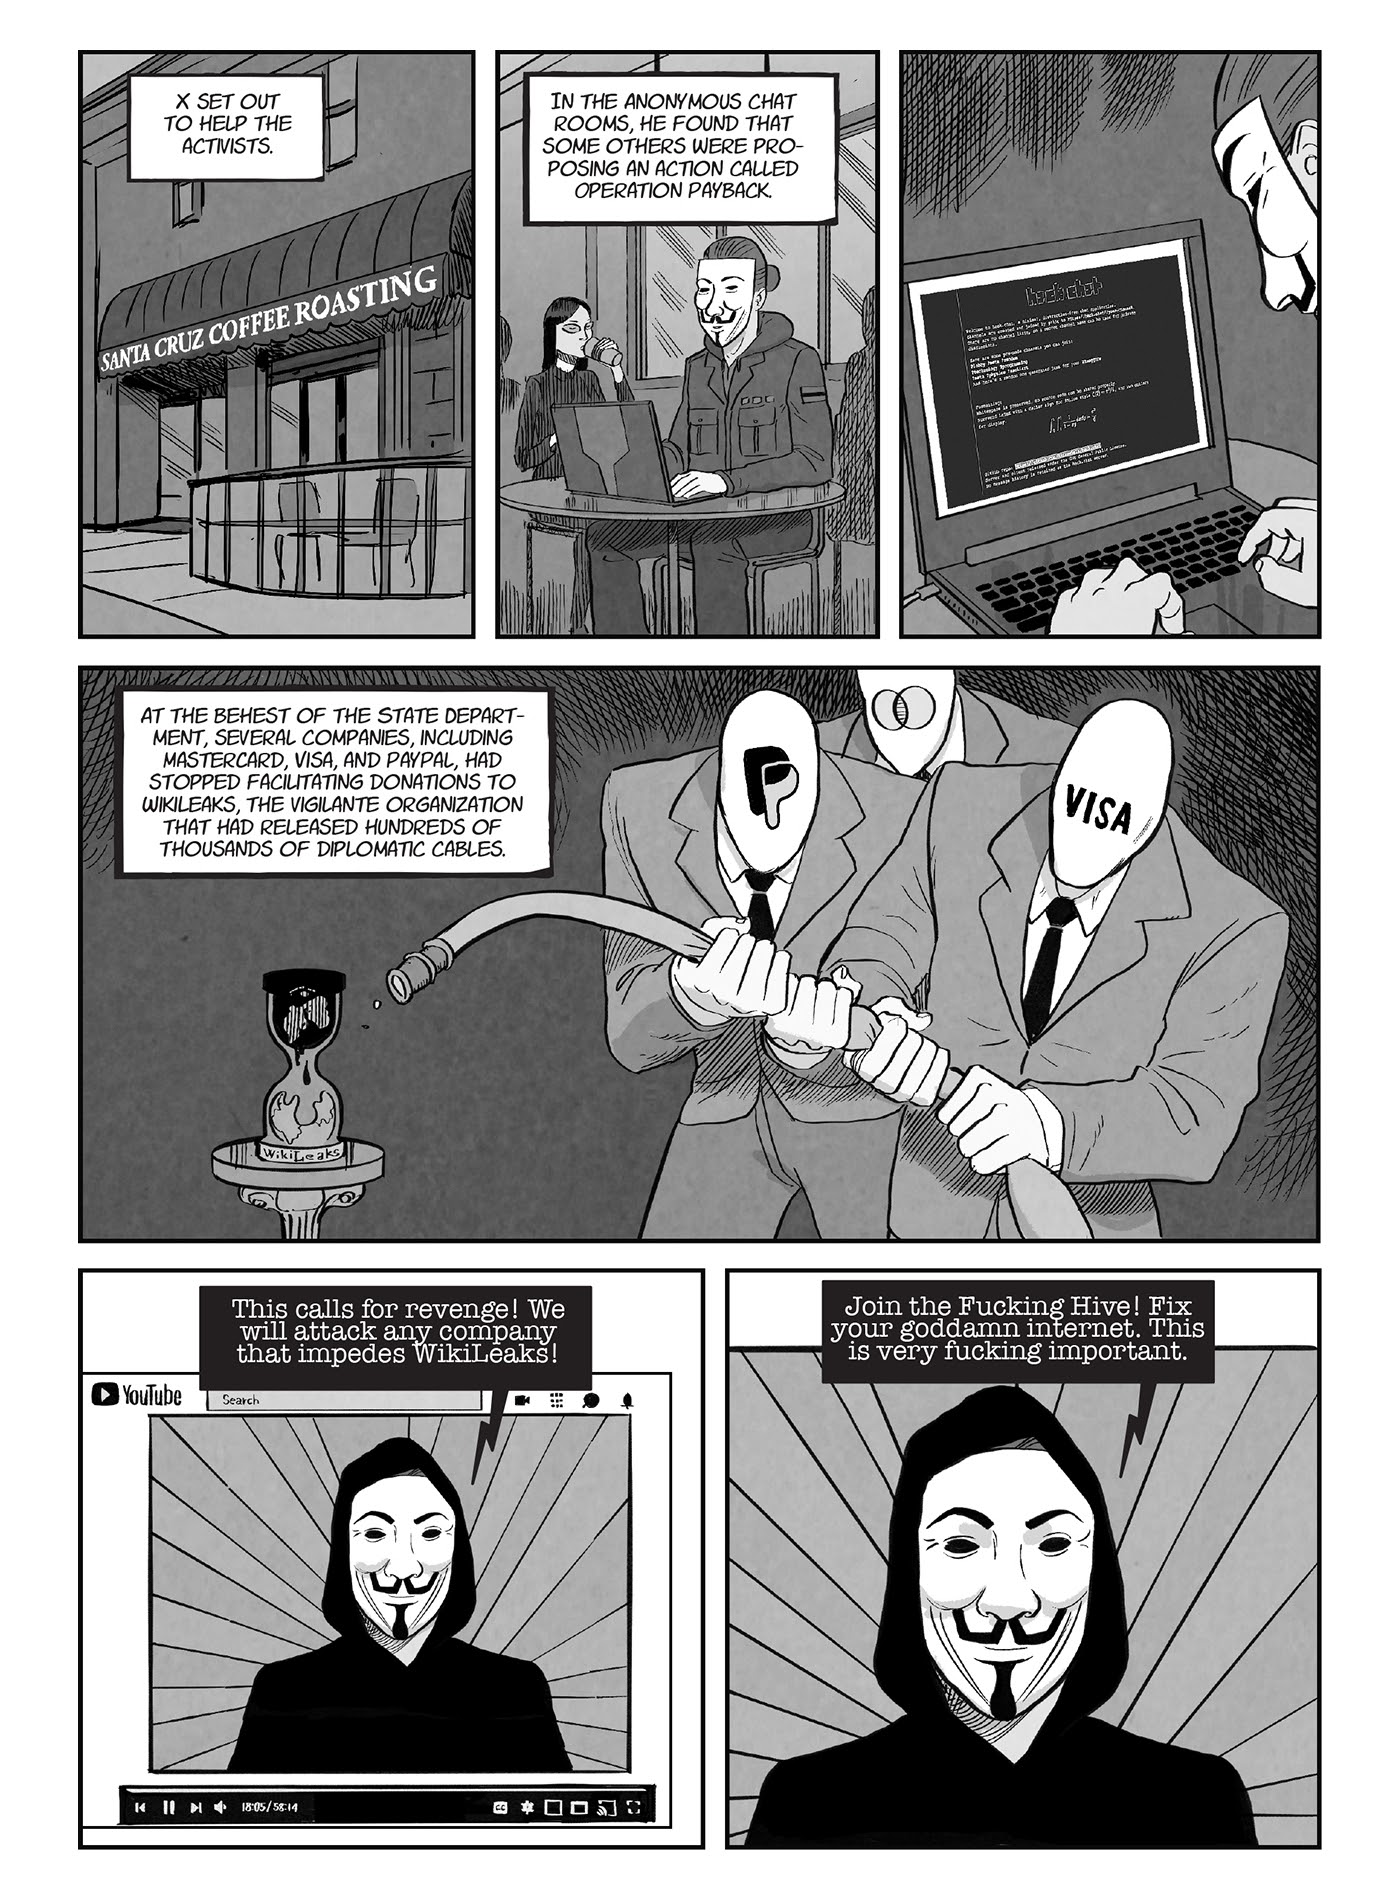 Read online A for Anonymous: How a Mysterious Hacker Collective Transformed the World comic -  Issue # TPB - 63